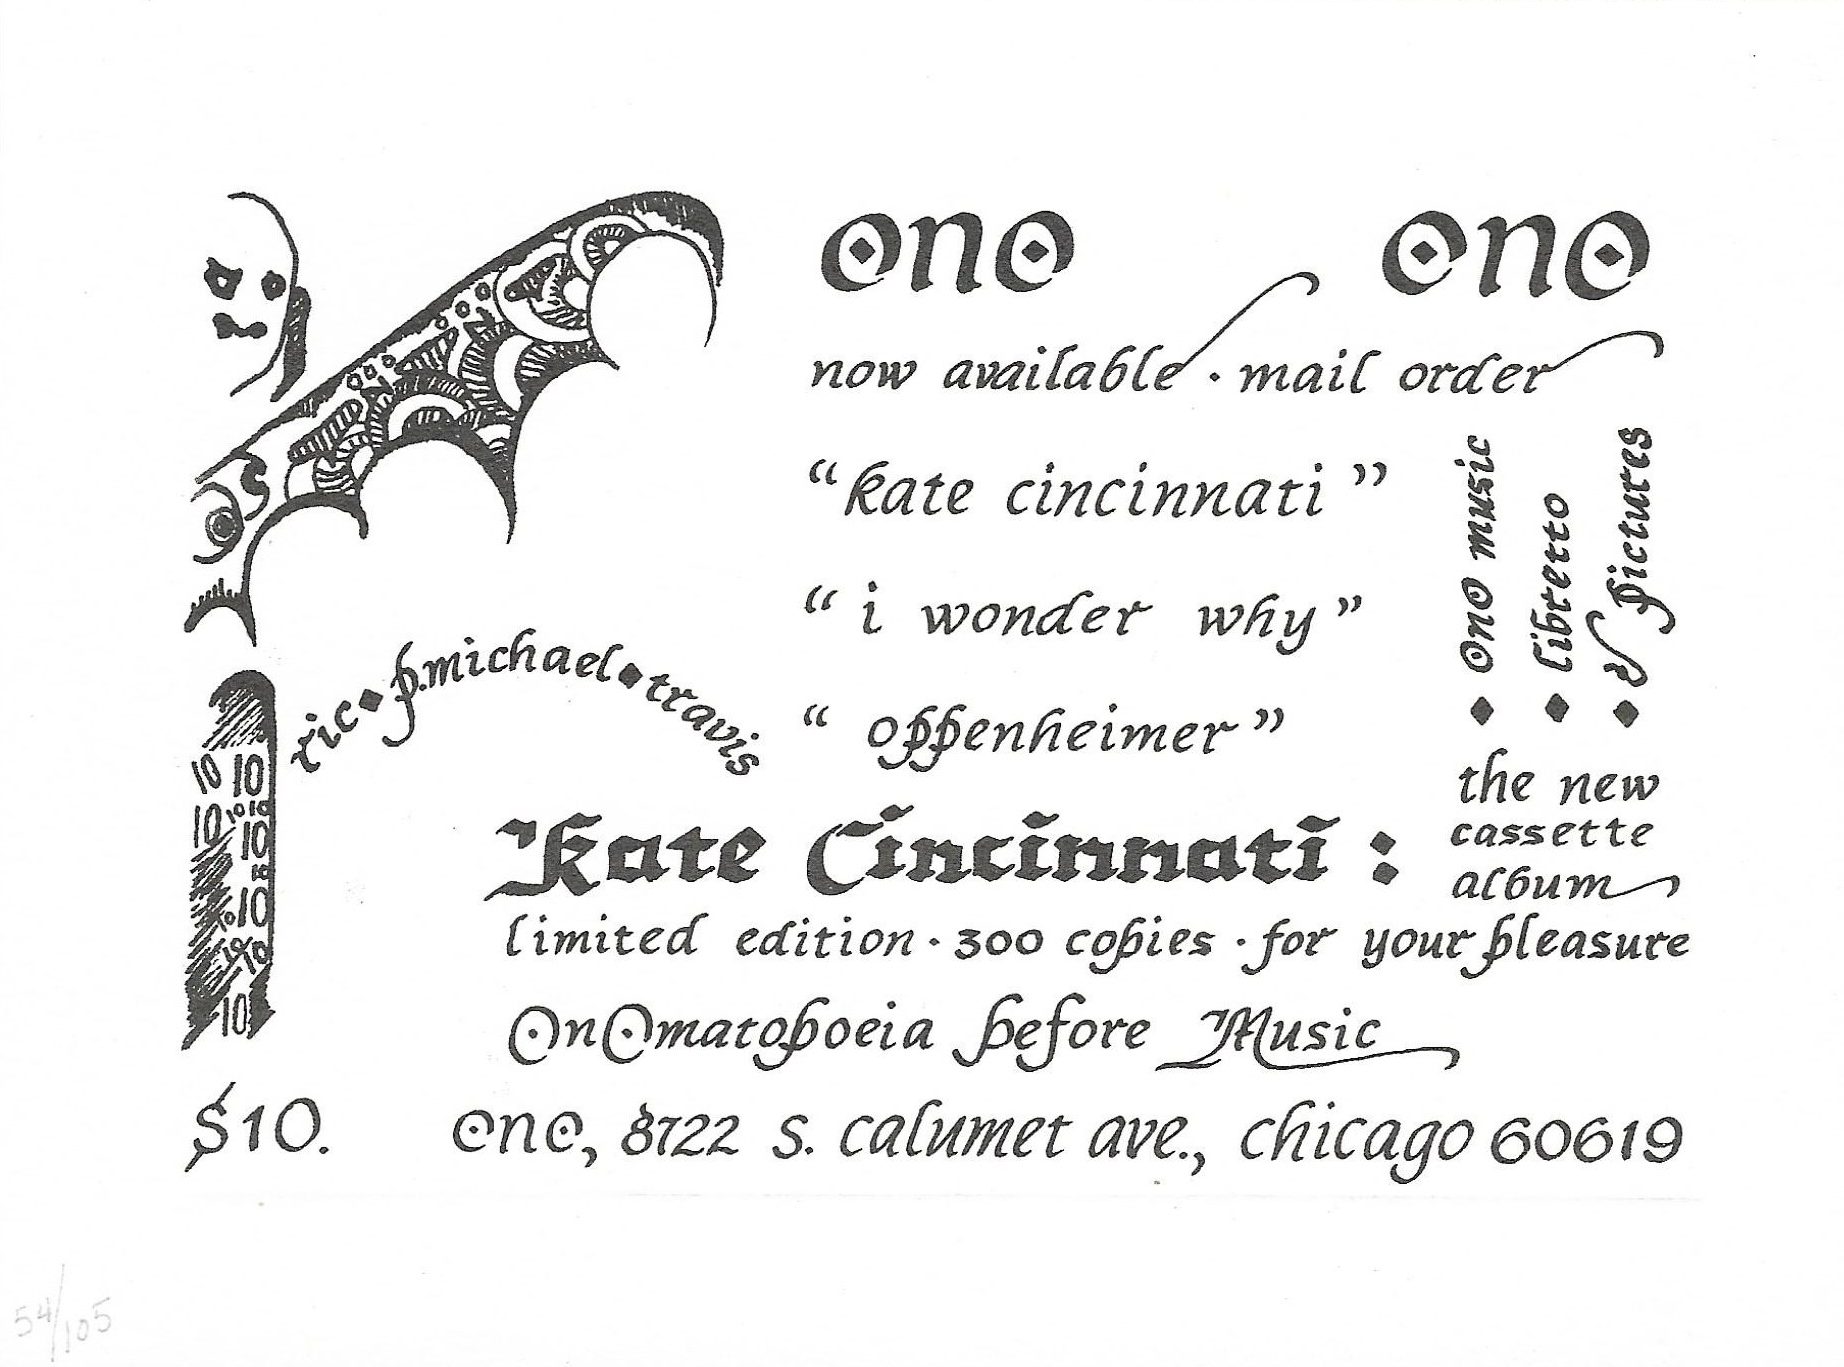 With calligraphy by travis, this card advertised the release of Kate Cincinnati on cassette in 1982. To the right of a bat figure, the card reads: "ONO. Now available. Mail order. "Kate Cincinnati," "I Wonder Why," "Oppenheimer." Limited edition. 300 copies. For your pleasure. Onomatopoeia before music."